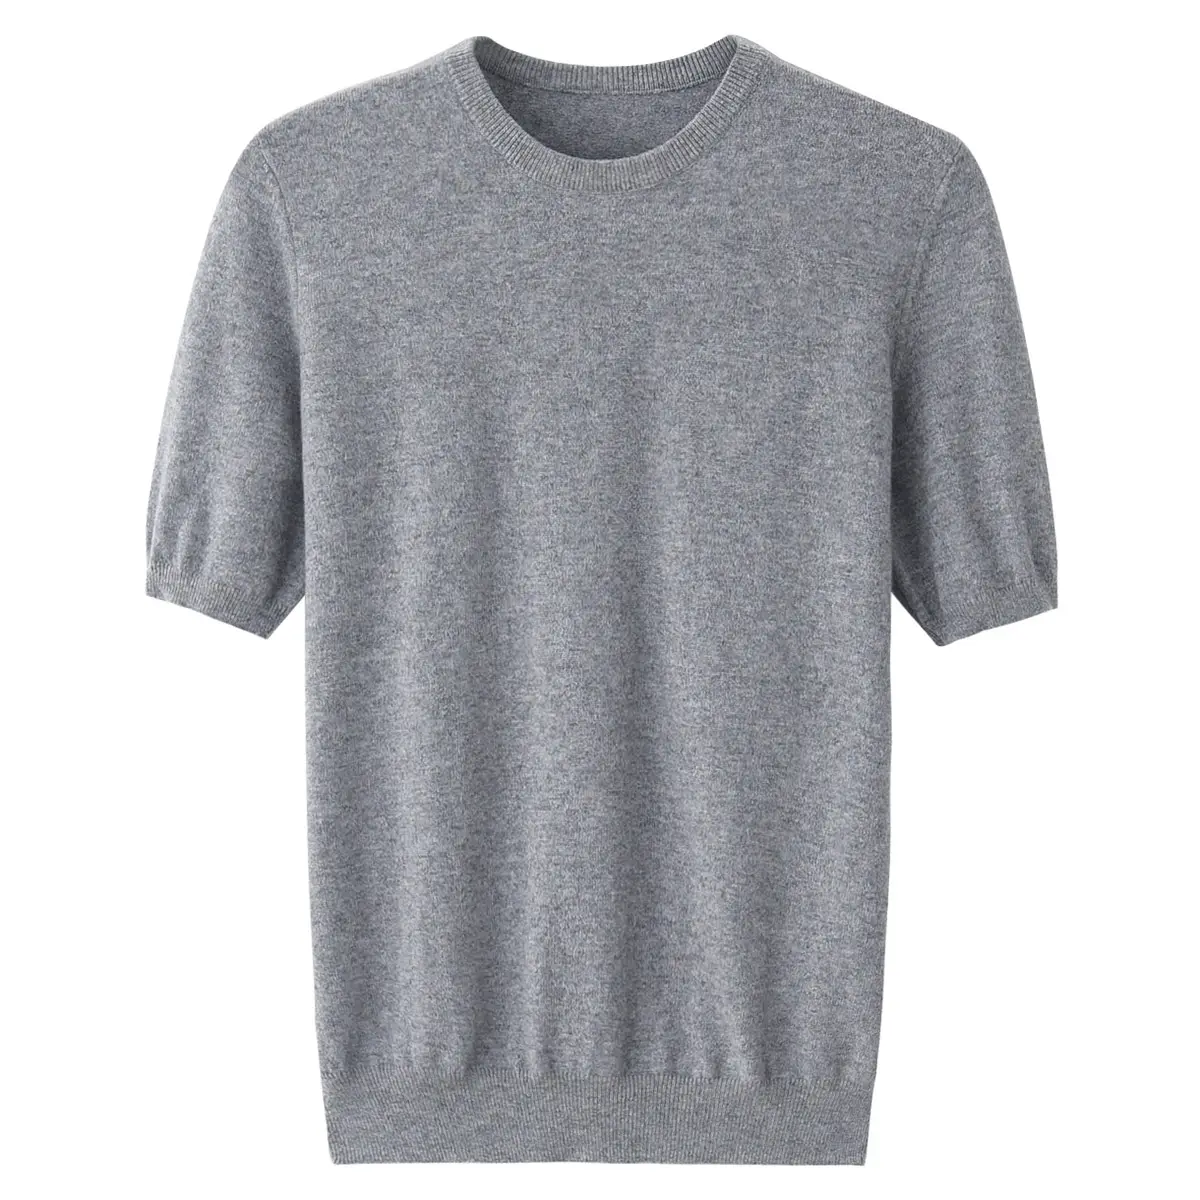 New Design 5 Cashmere Knitted Fabric Crew Neck T-shirt 95 Cotton style For Men in summer